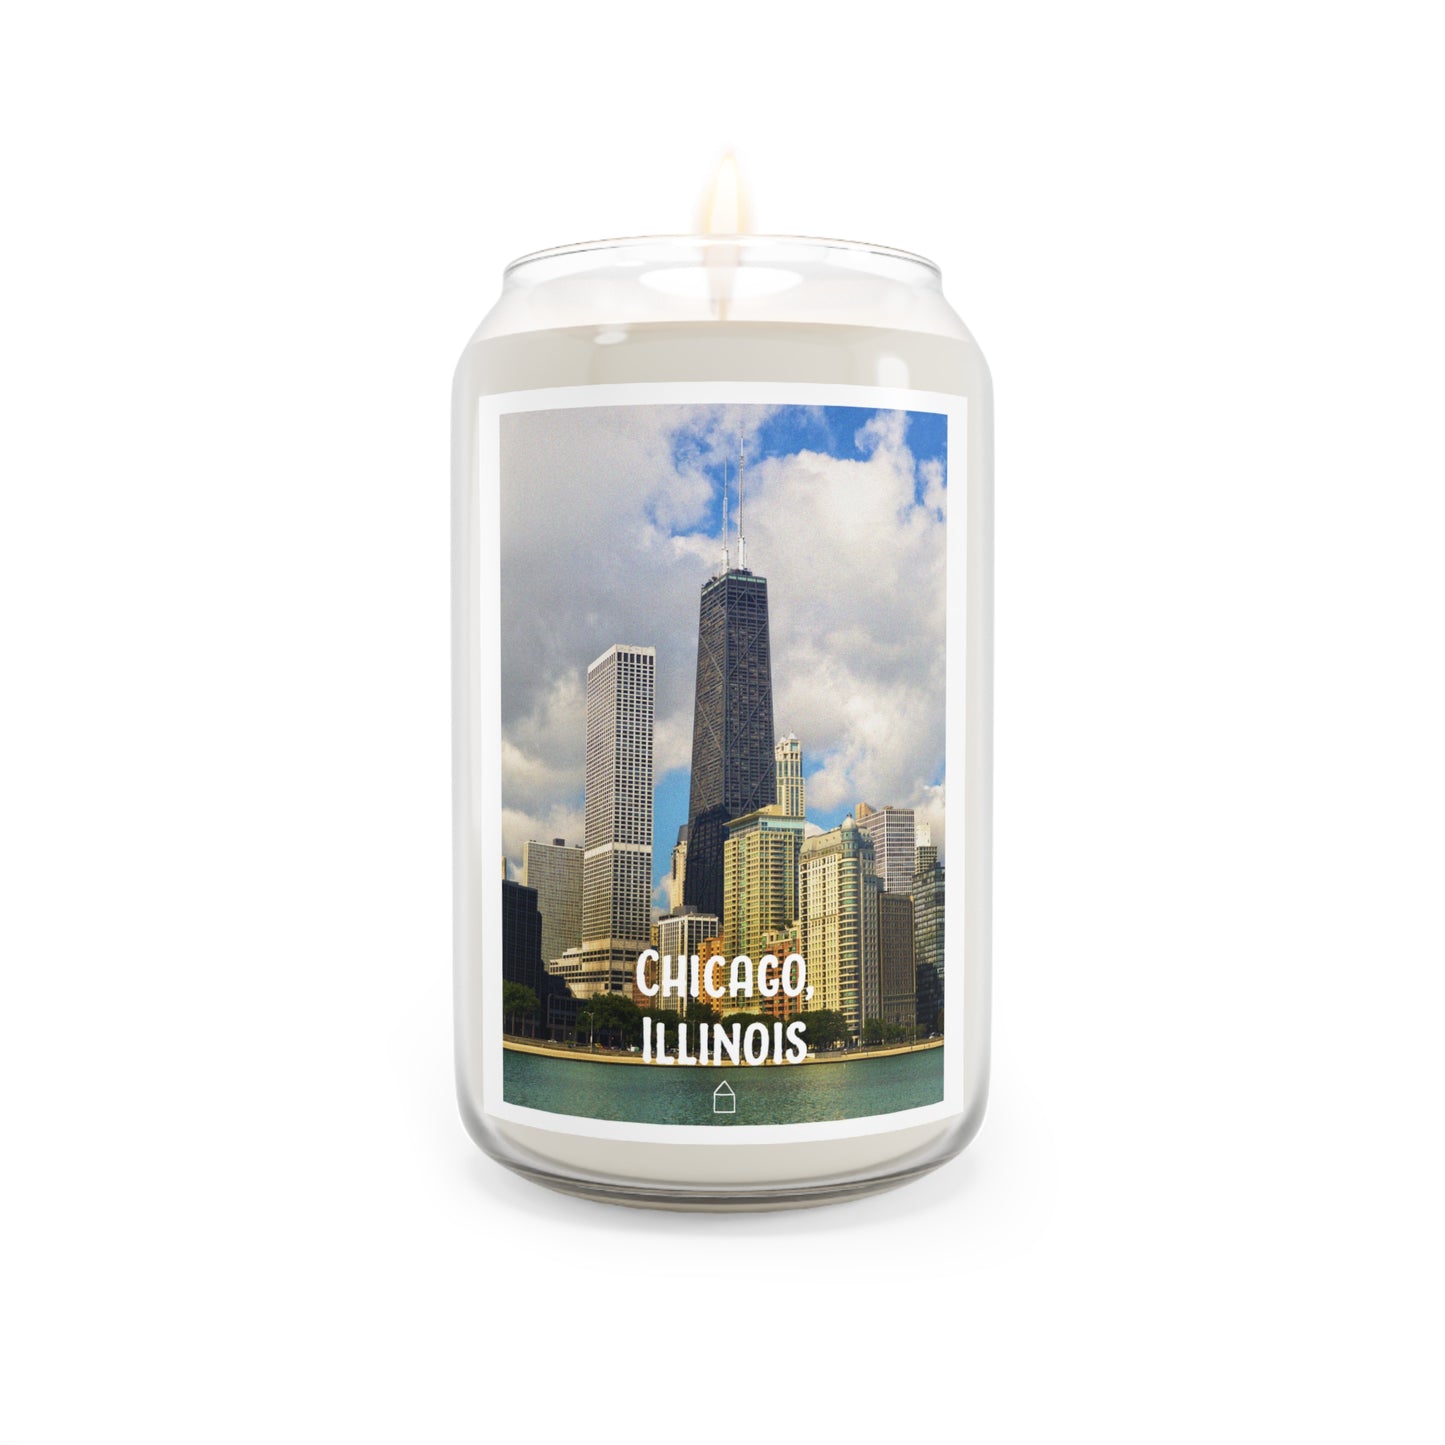 Chicago, Illinois (#015) - Home Town Candles, 13.75oz